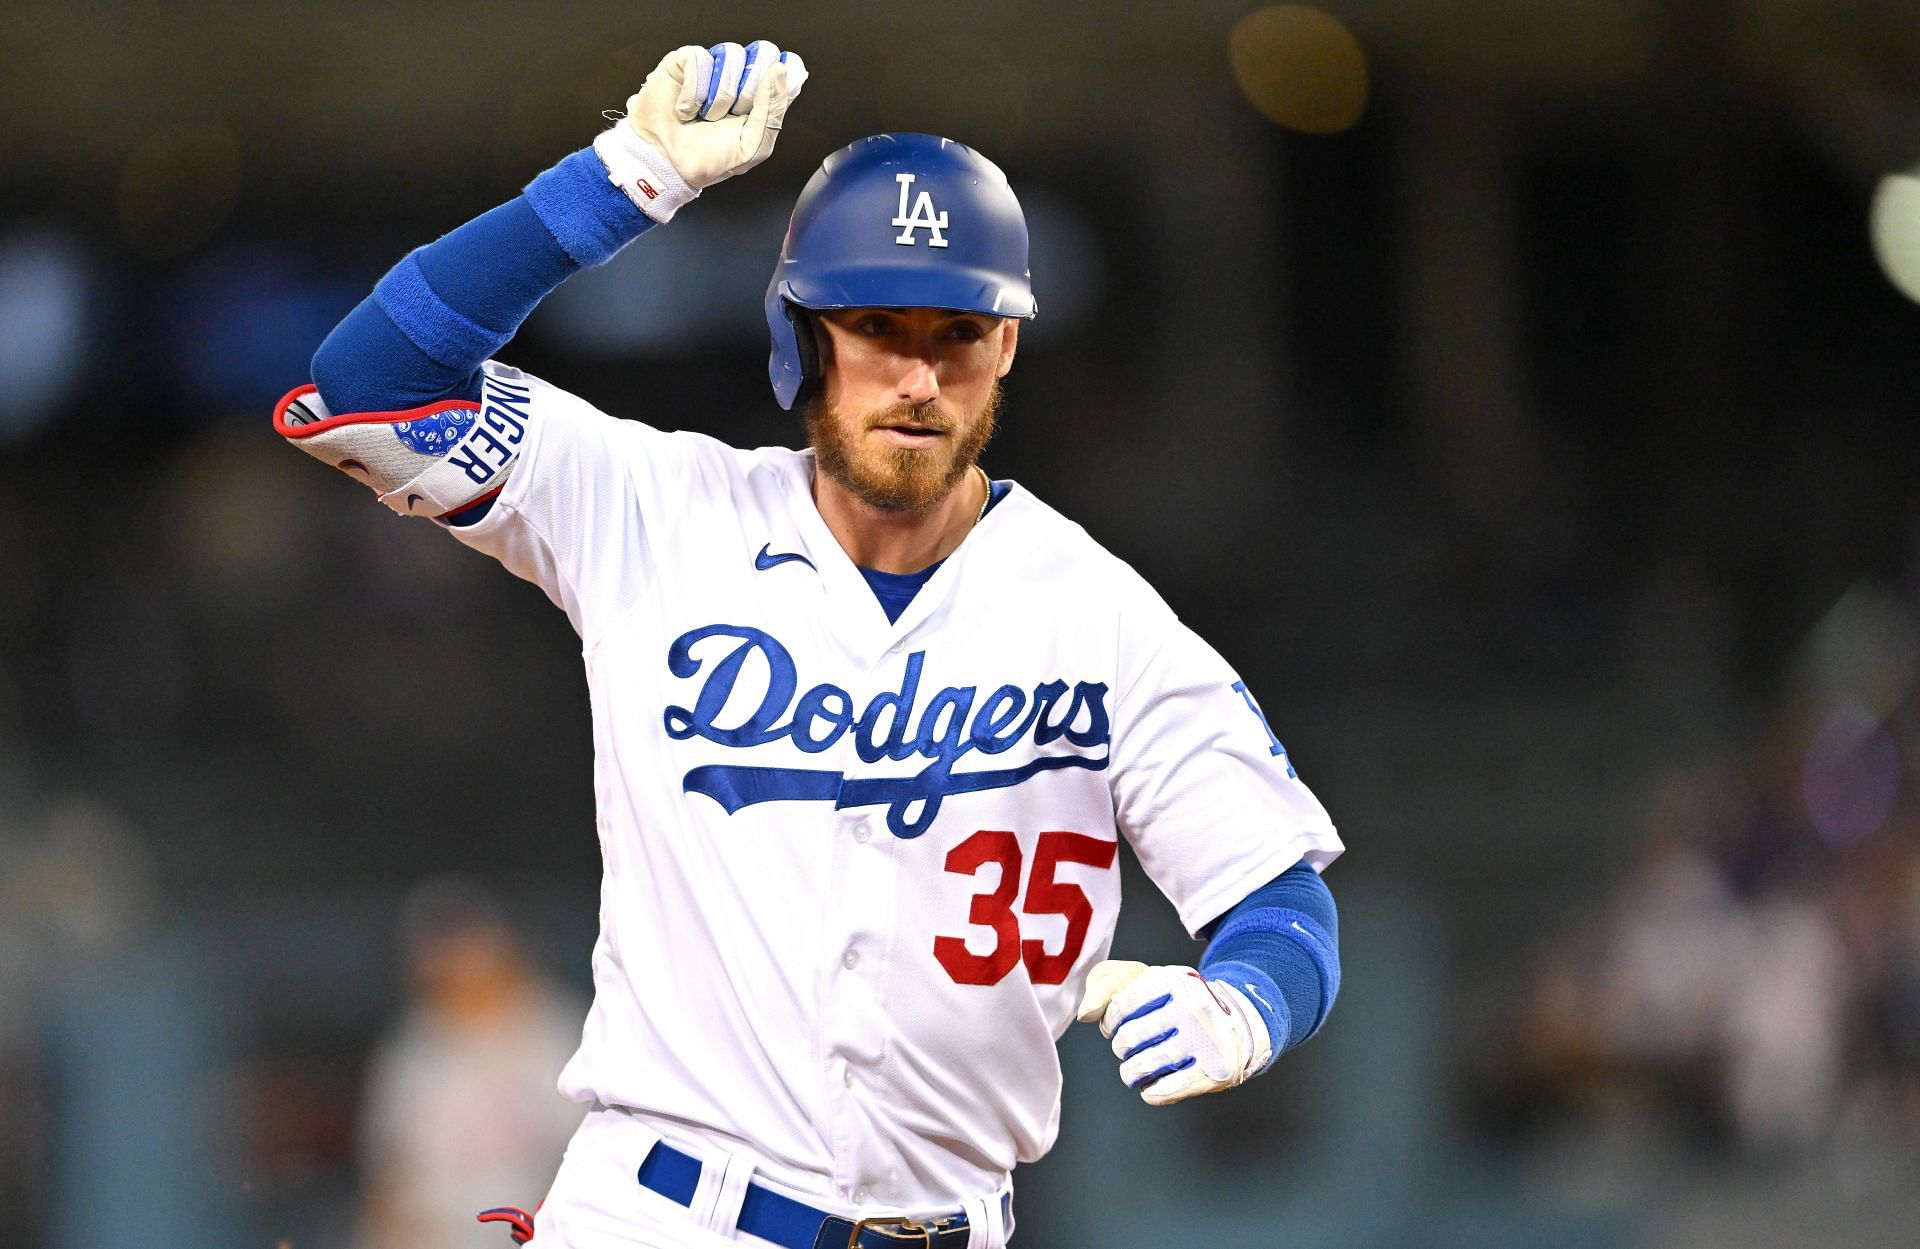 Dodgers News: Cody Bellinger, Mookie Betts Named Gold Glove Award Finalists  